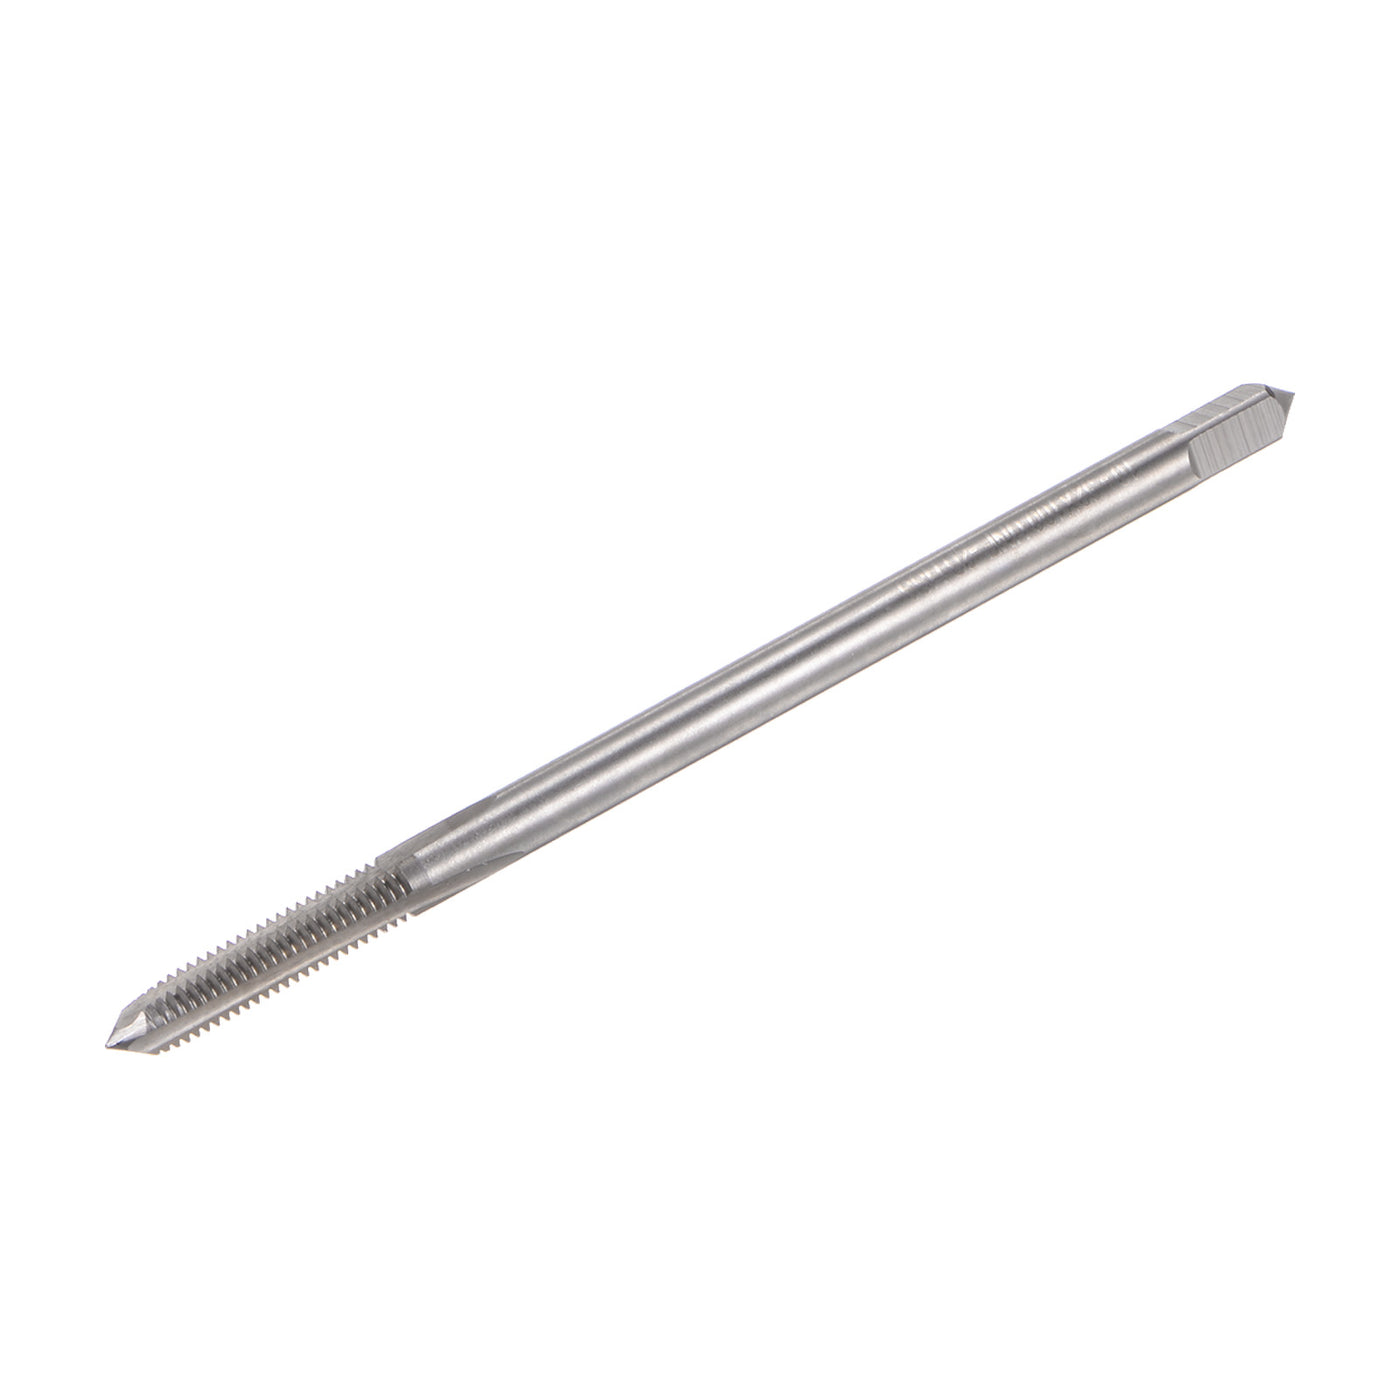 Uxcell Uxcell 1/4-28 UNF High Speed Steel 4" Length 3 Straight Flute Machine Screw Thread Tap